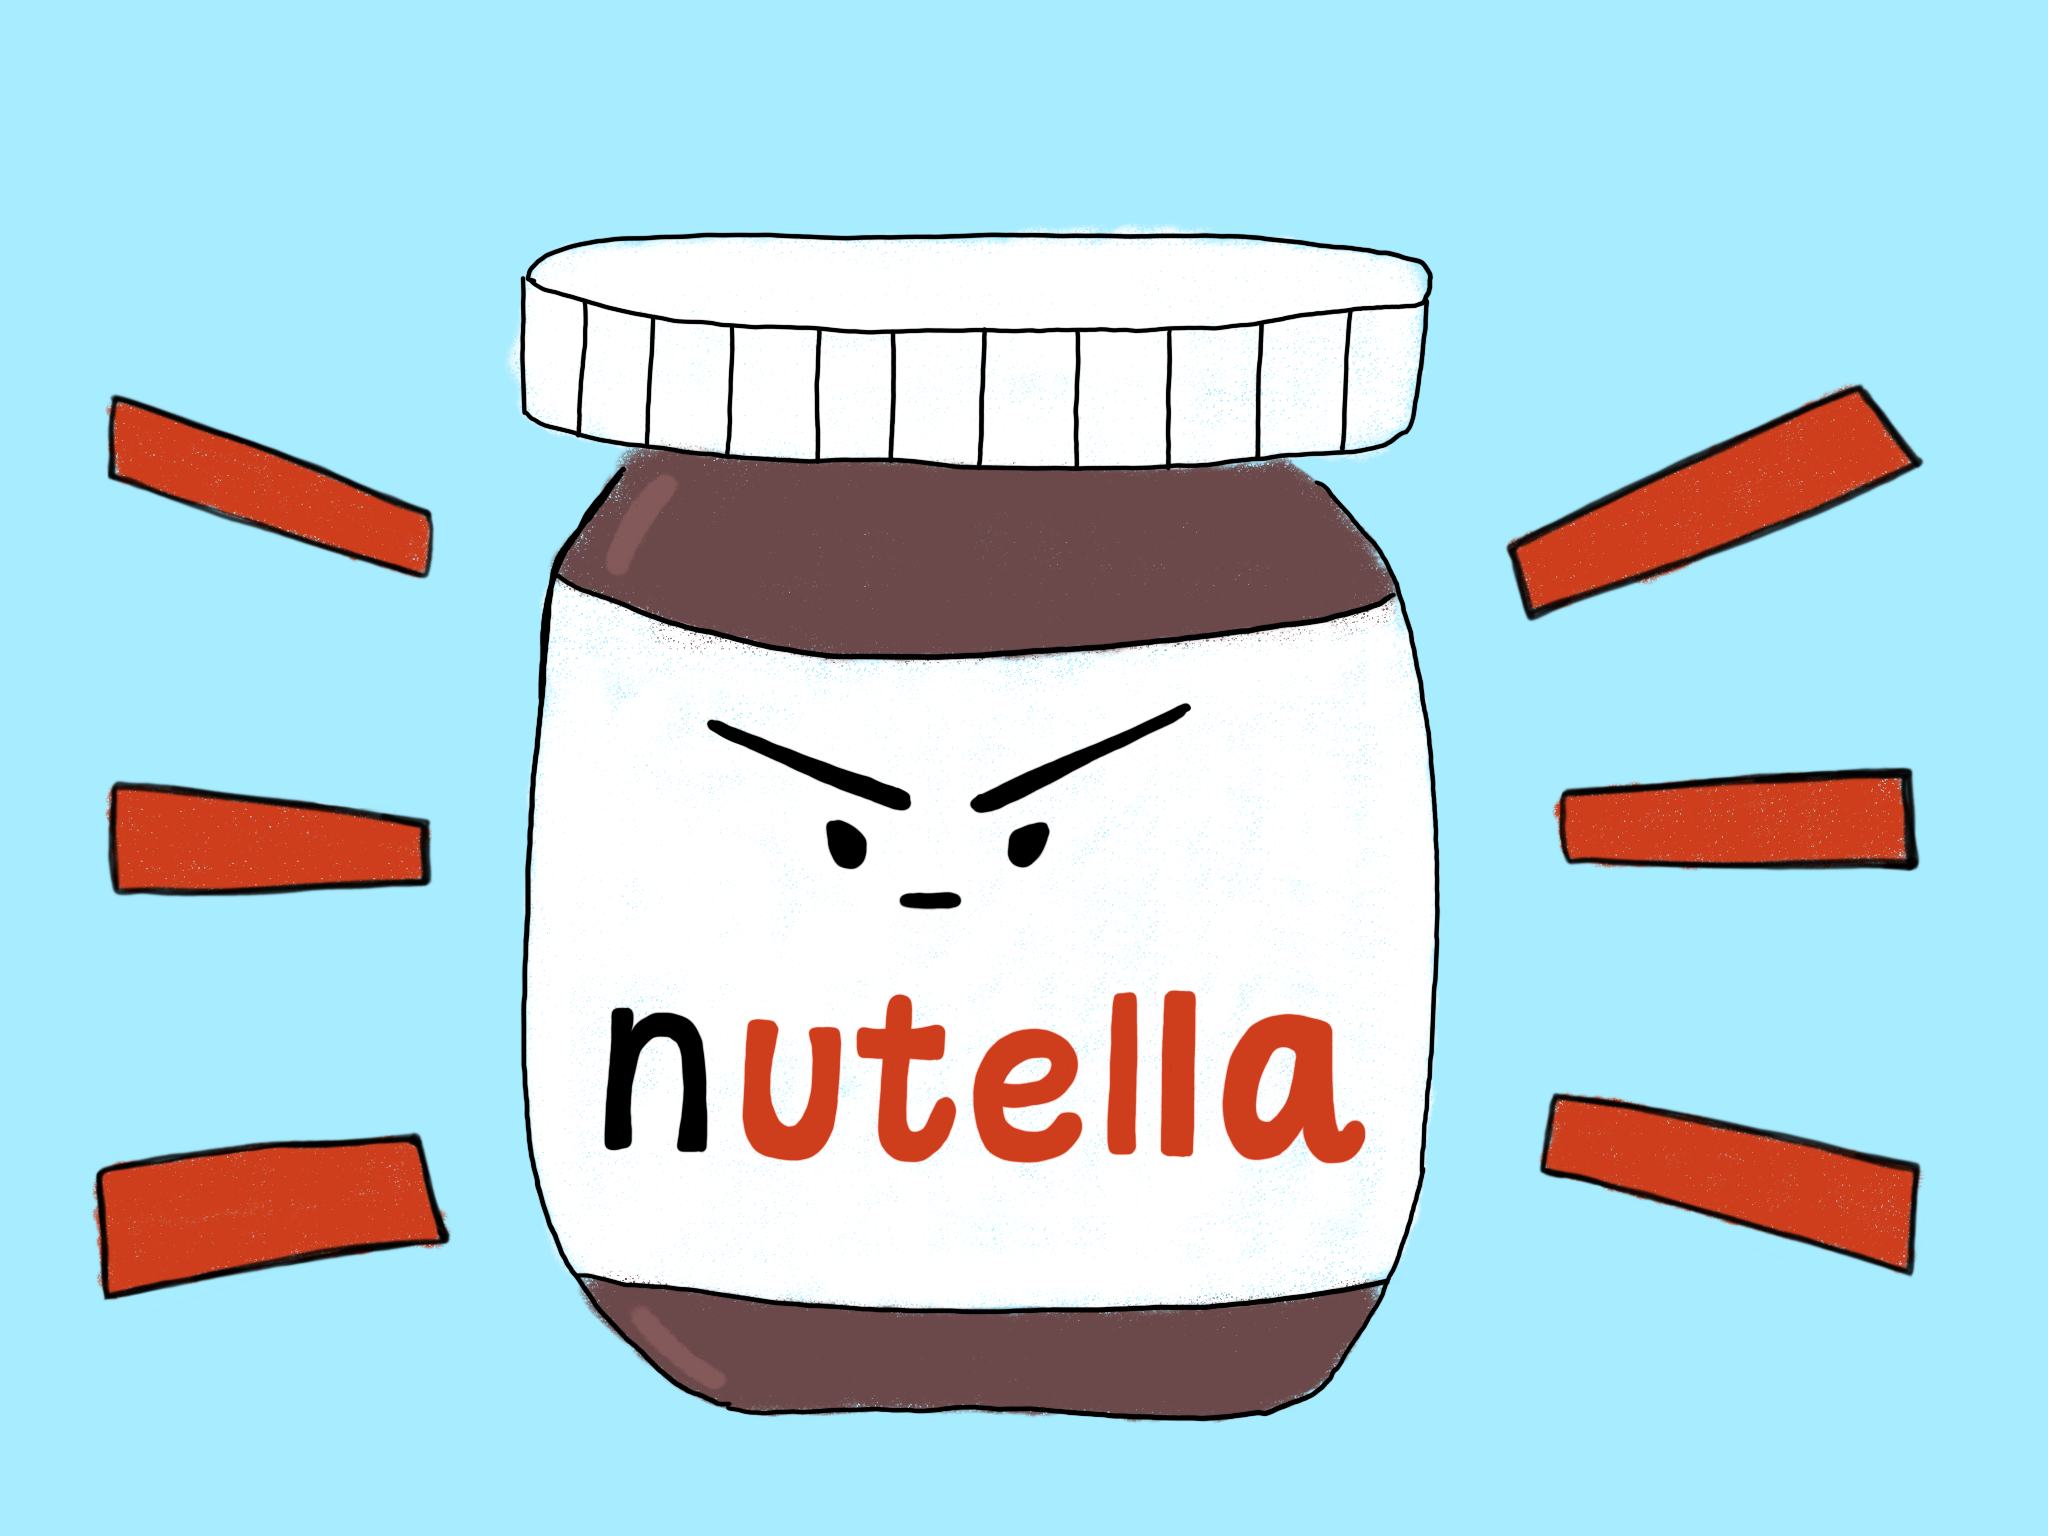 A mischievous jar of Nutella and an apparent win